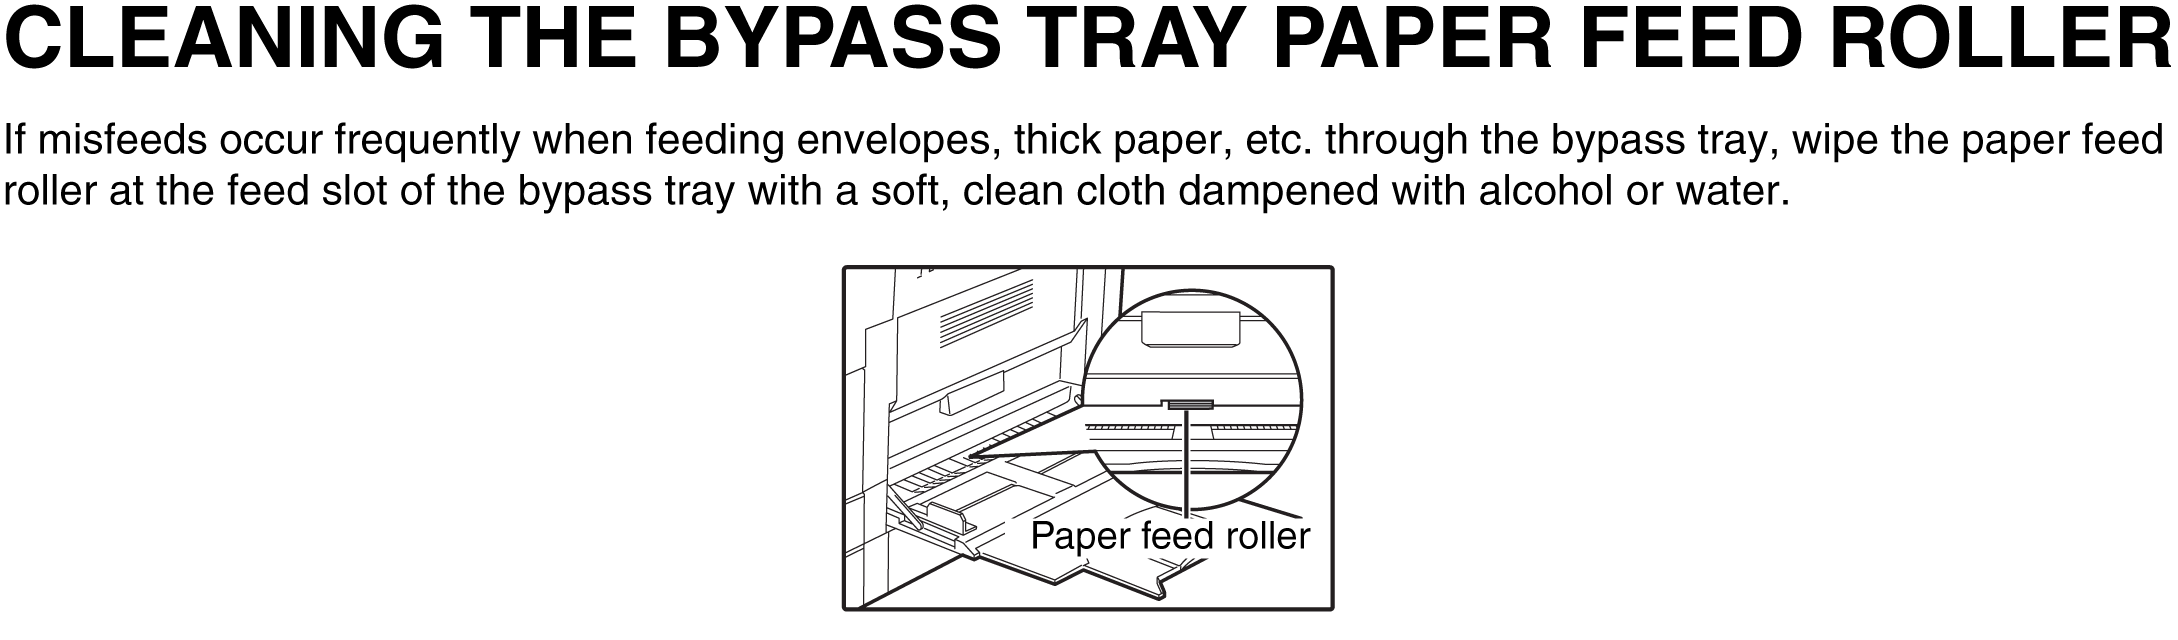 Cleaning The Bypass Tray Paper Feed Roller